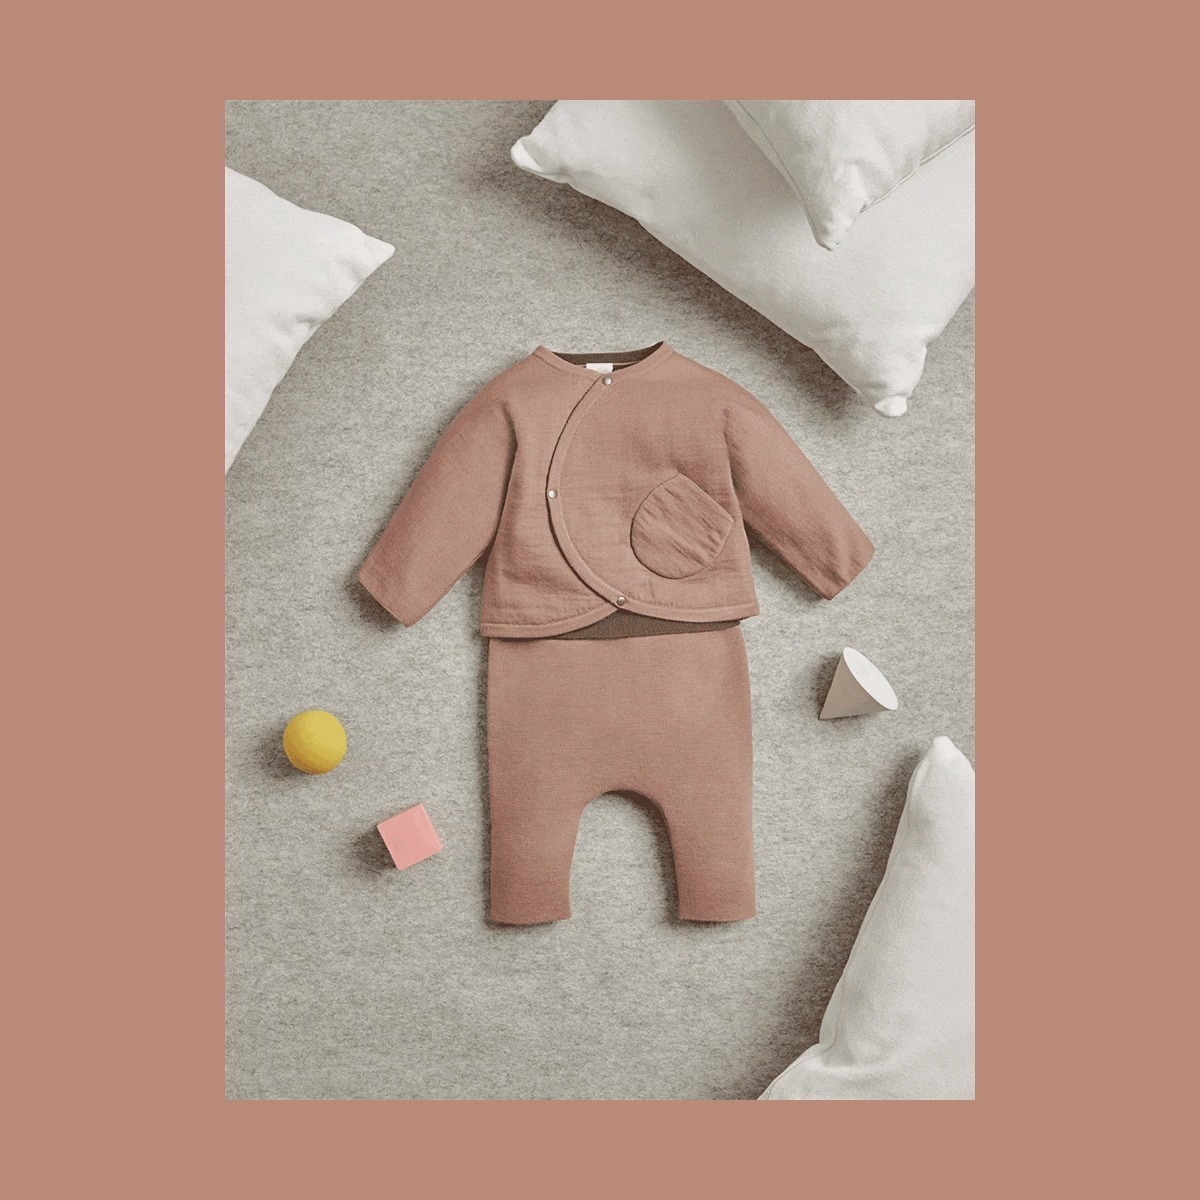 Cosy and comforting, this new collection features our snuggliest pieces yet: from snowsuits to sleeping bags and soft rompers in organic cotton. Available exclusively online. Shop baby: festivalwalk